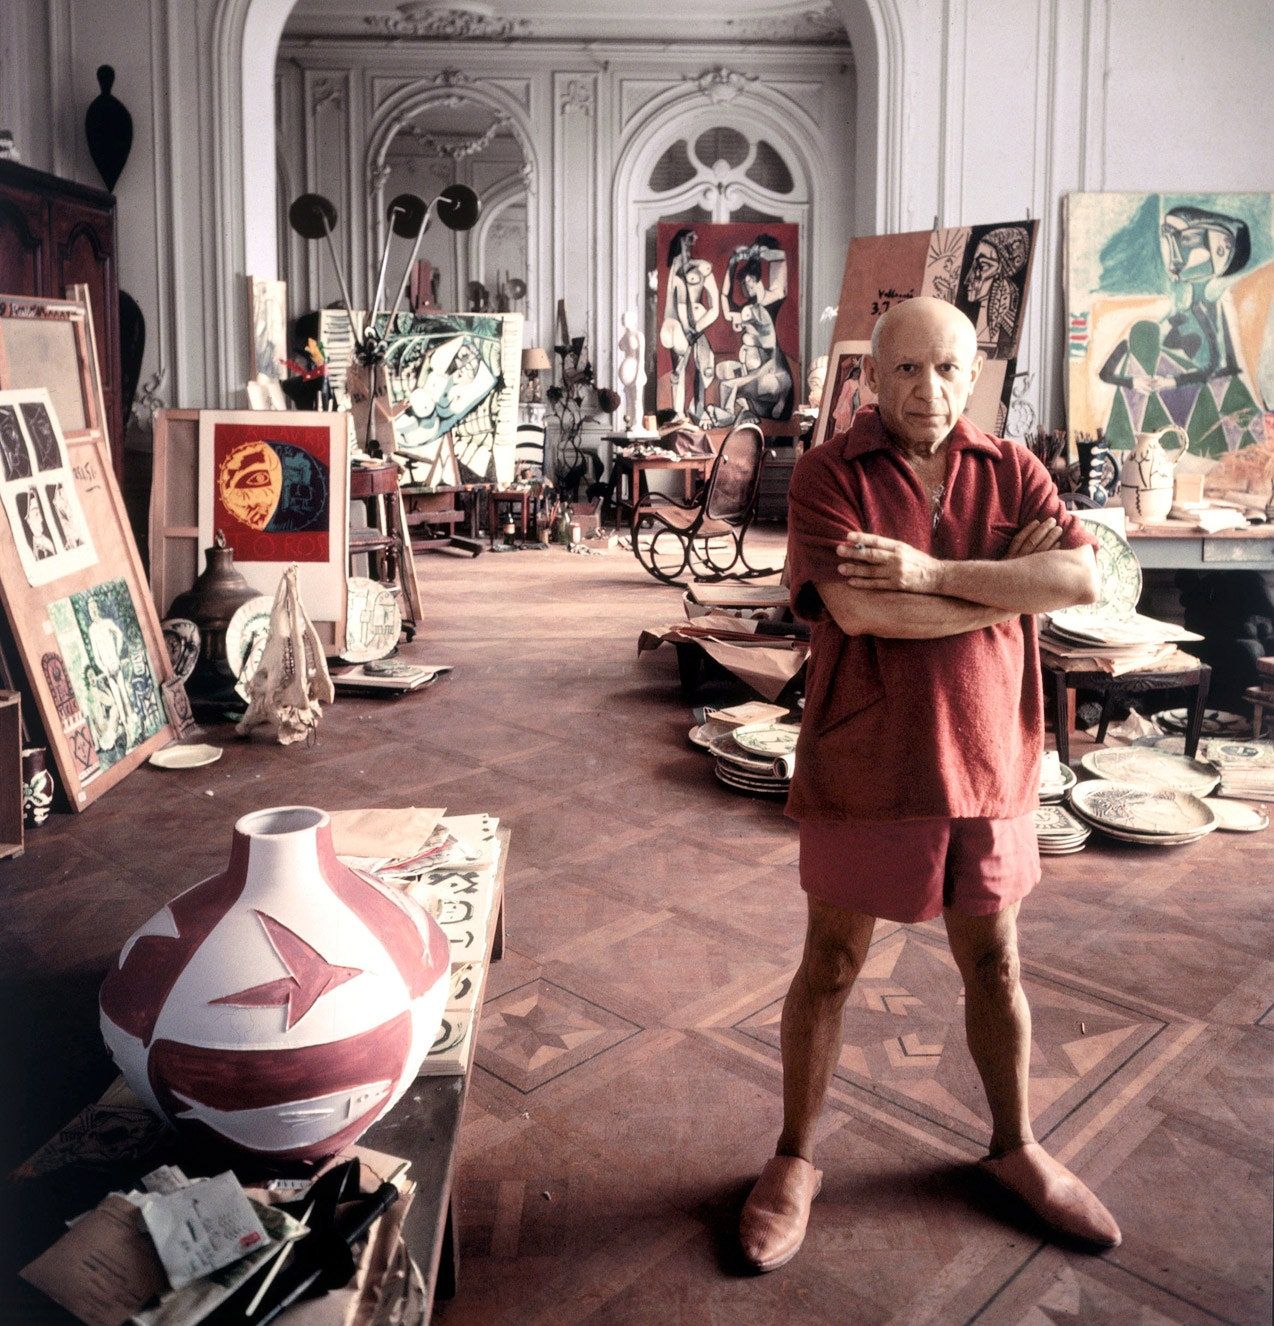 Pablo Picasso in Cannes, September 11, 1956